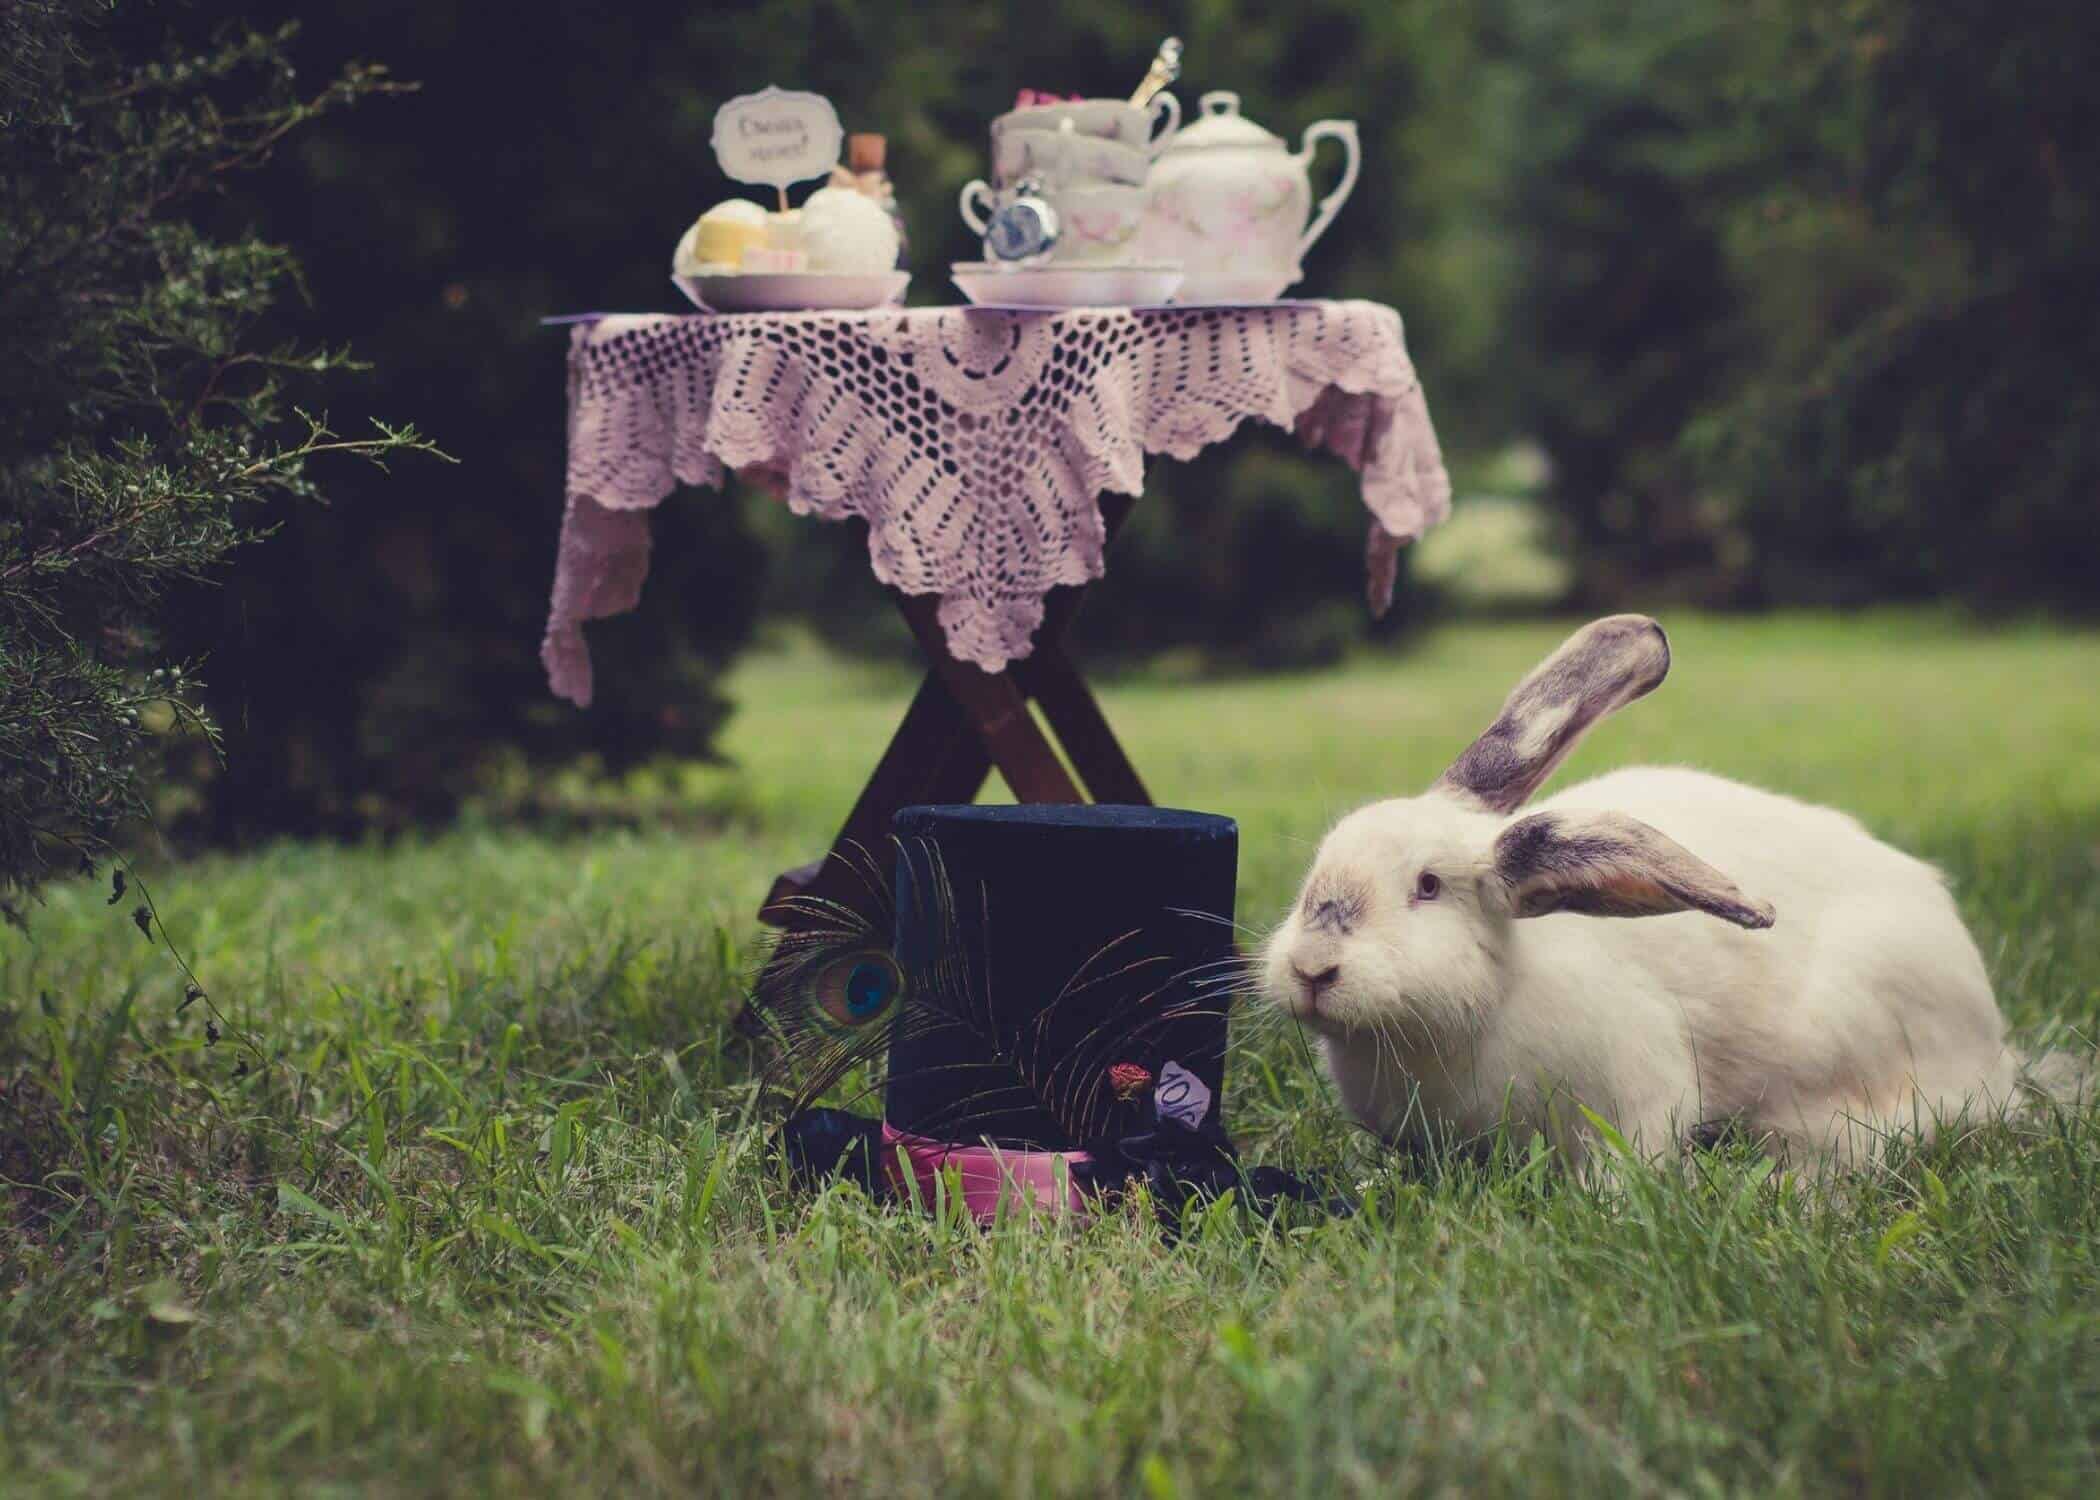 Rabbit and top hat on the grass in front of a table set for a tea party. Is a hat tea party attire?